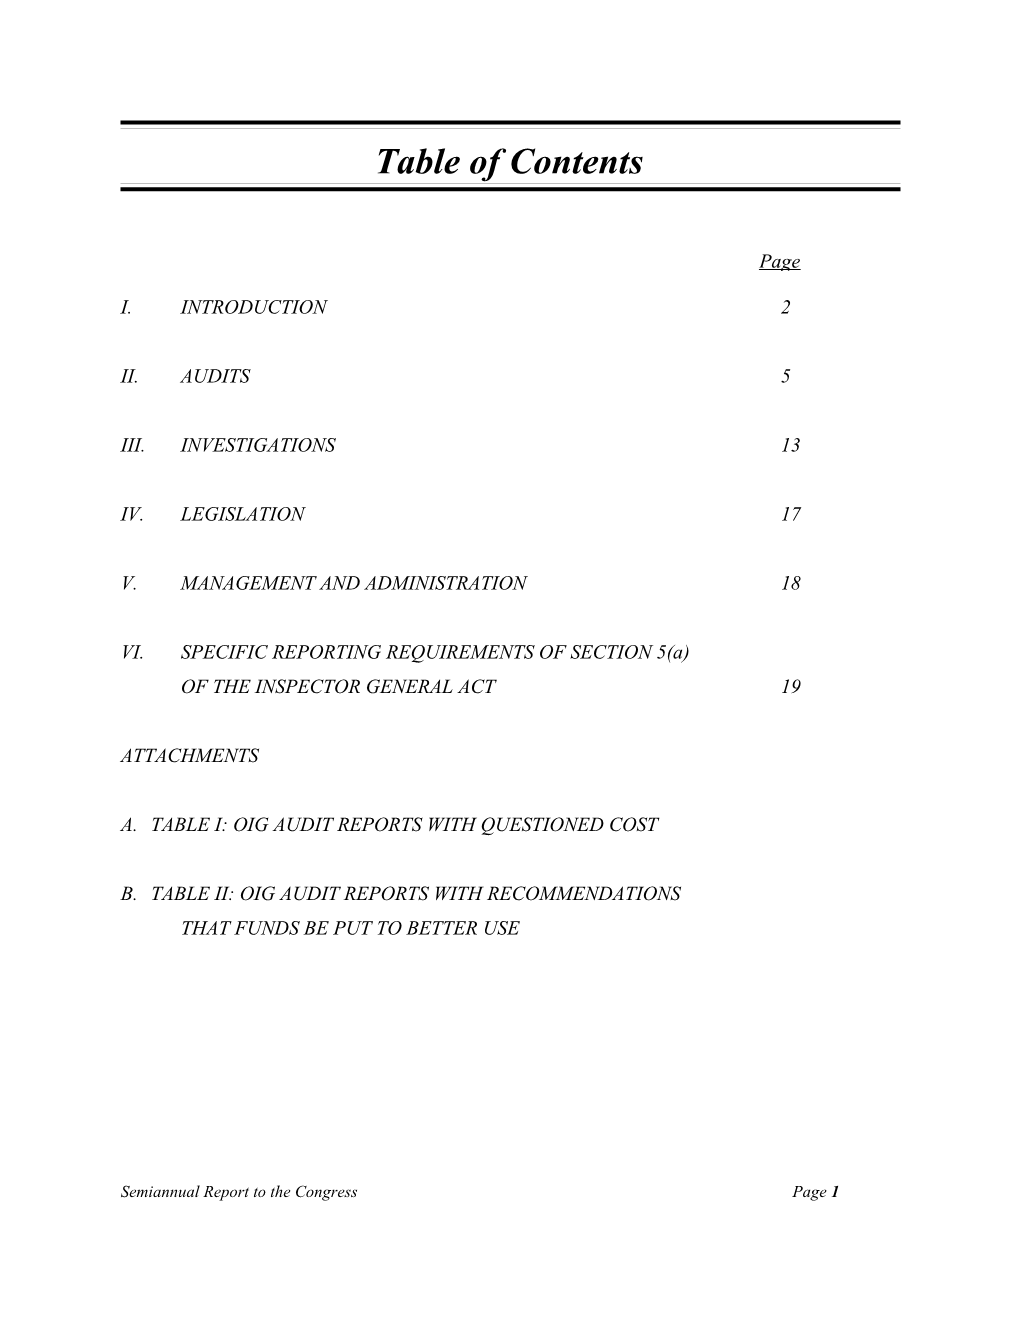 Table of Contents s101